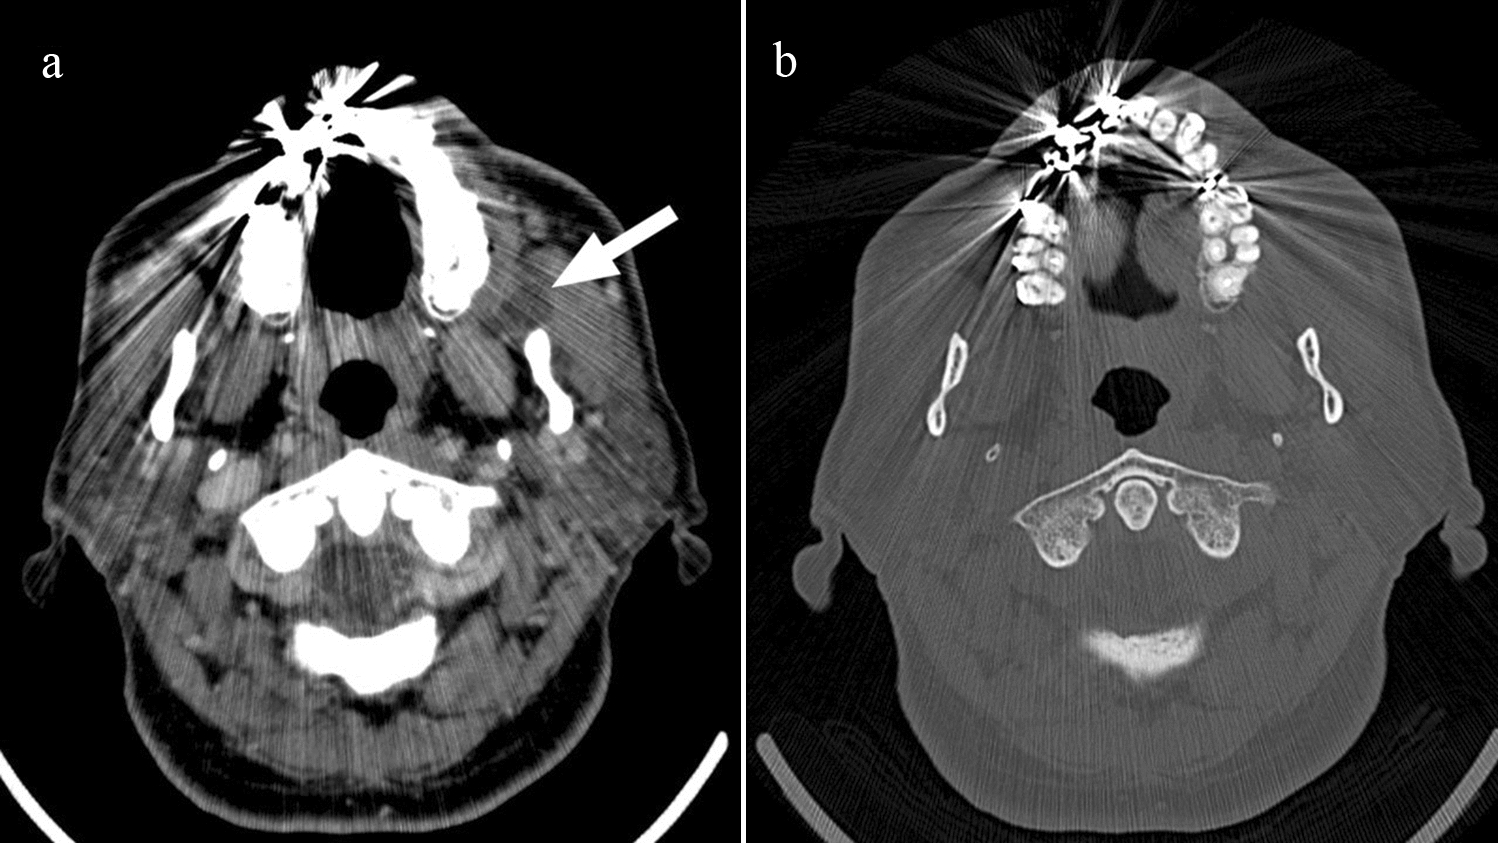 A case of odontogenic keratocyst in the buccal space: characterization by multimodality imaging including computed tomography, diffusion-weighted magnetic resonance imaging, and ultrasonography